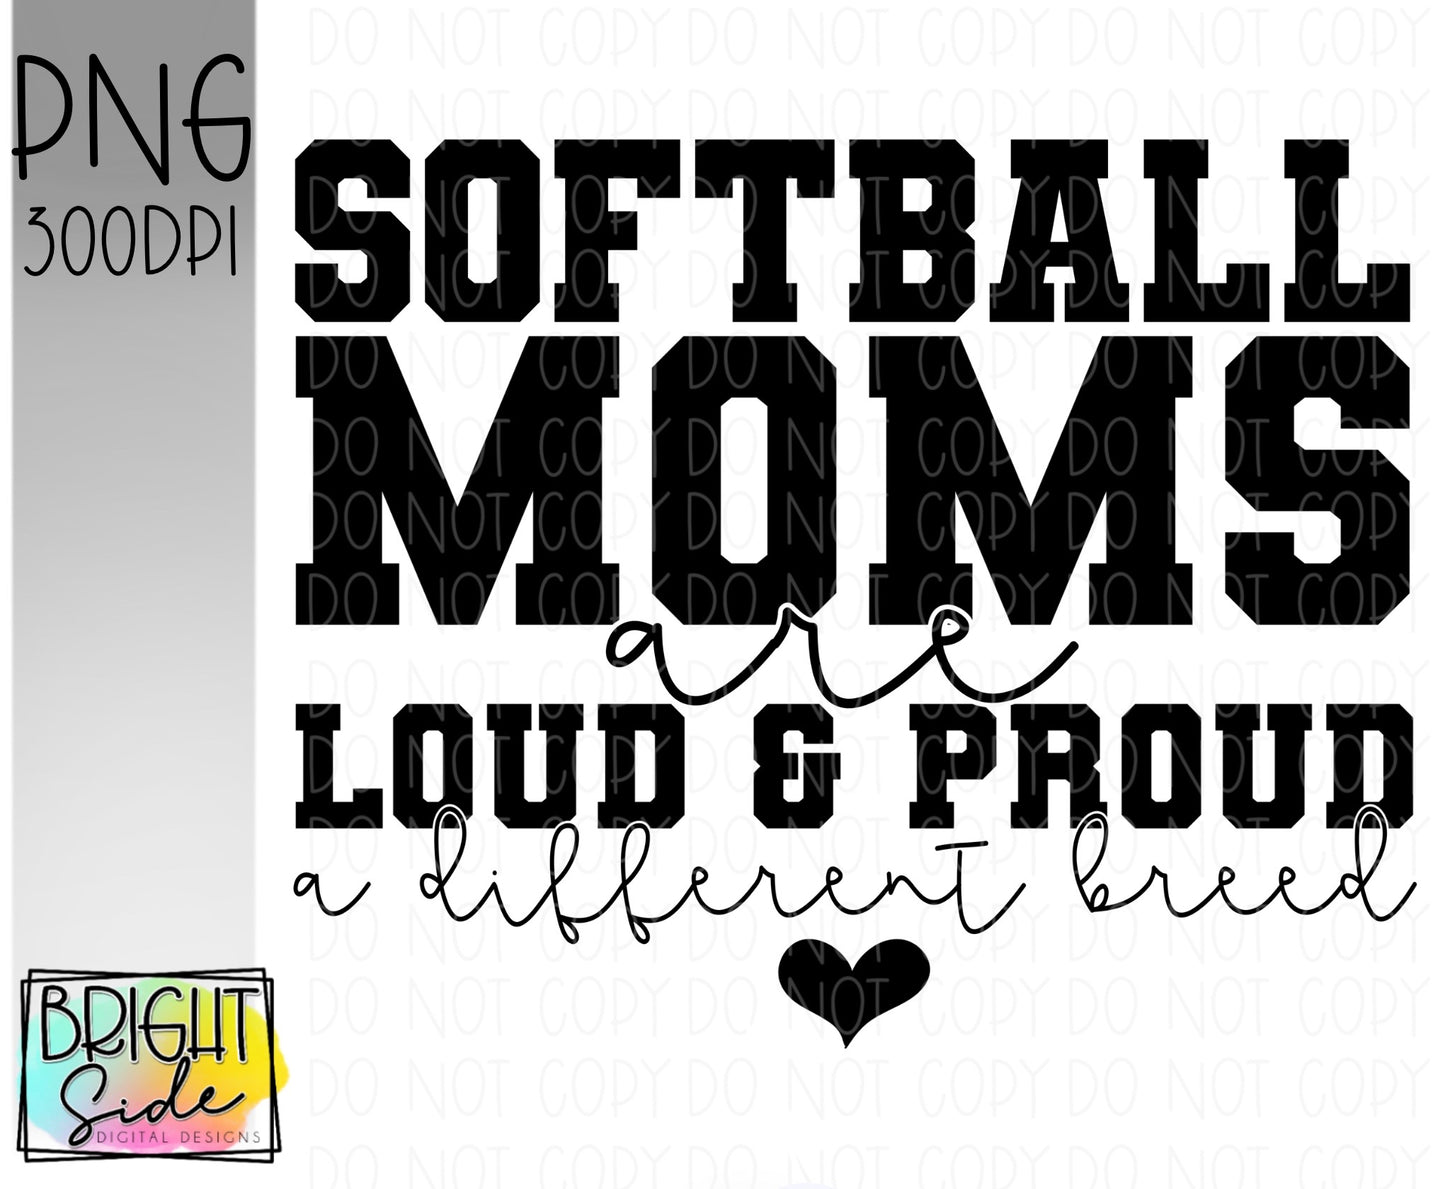 Softball moms -a different breed